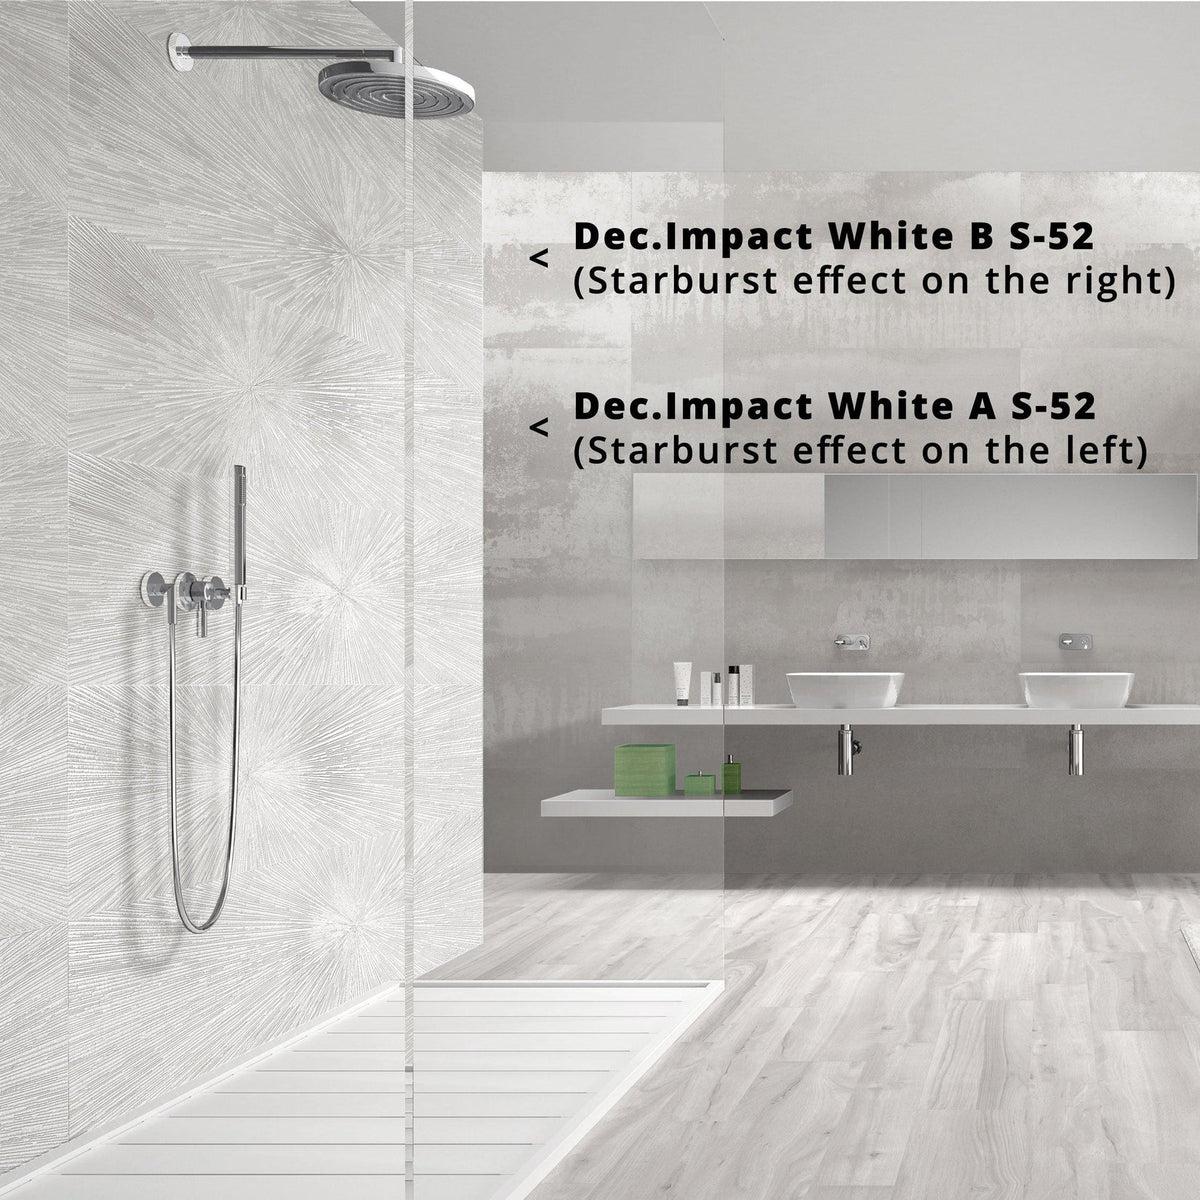 Ionic White Porcelain Tile for Shower and Bathroom